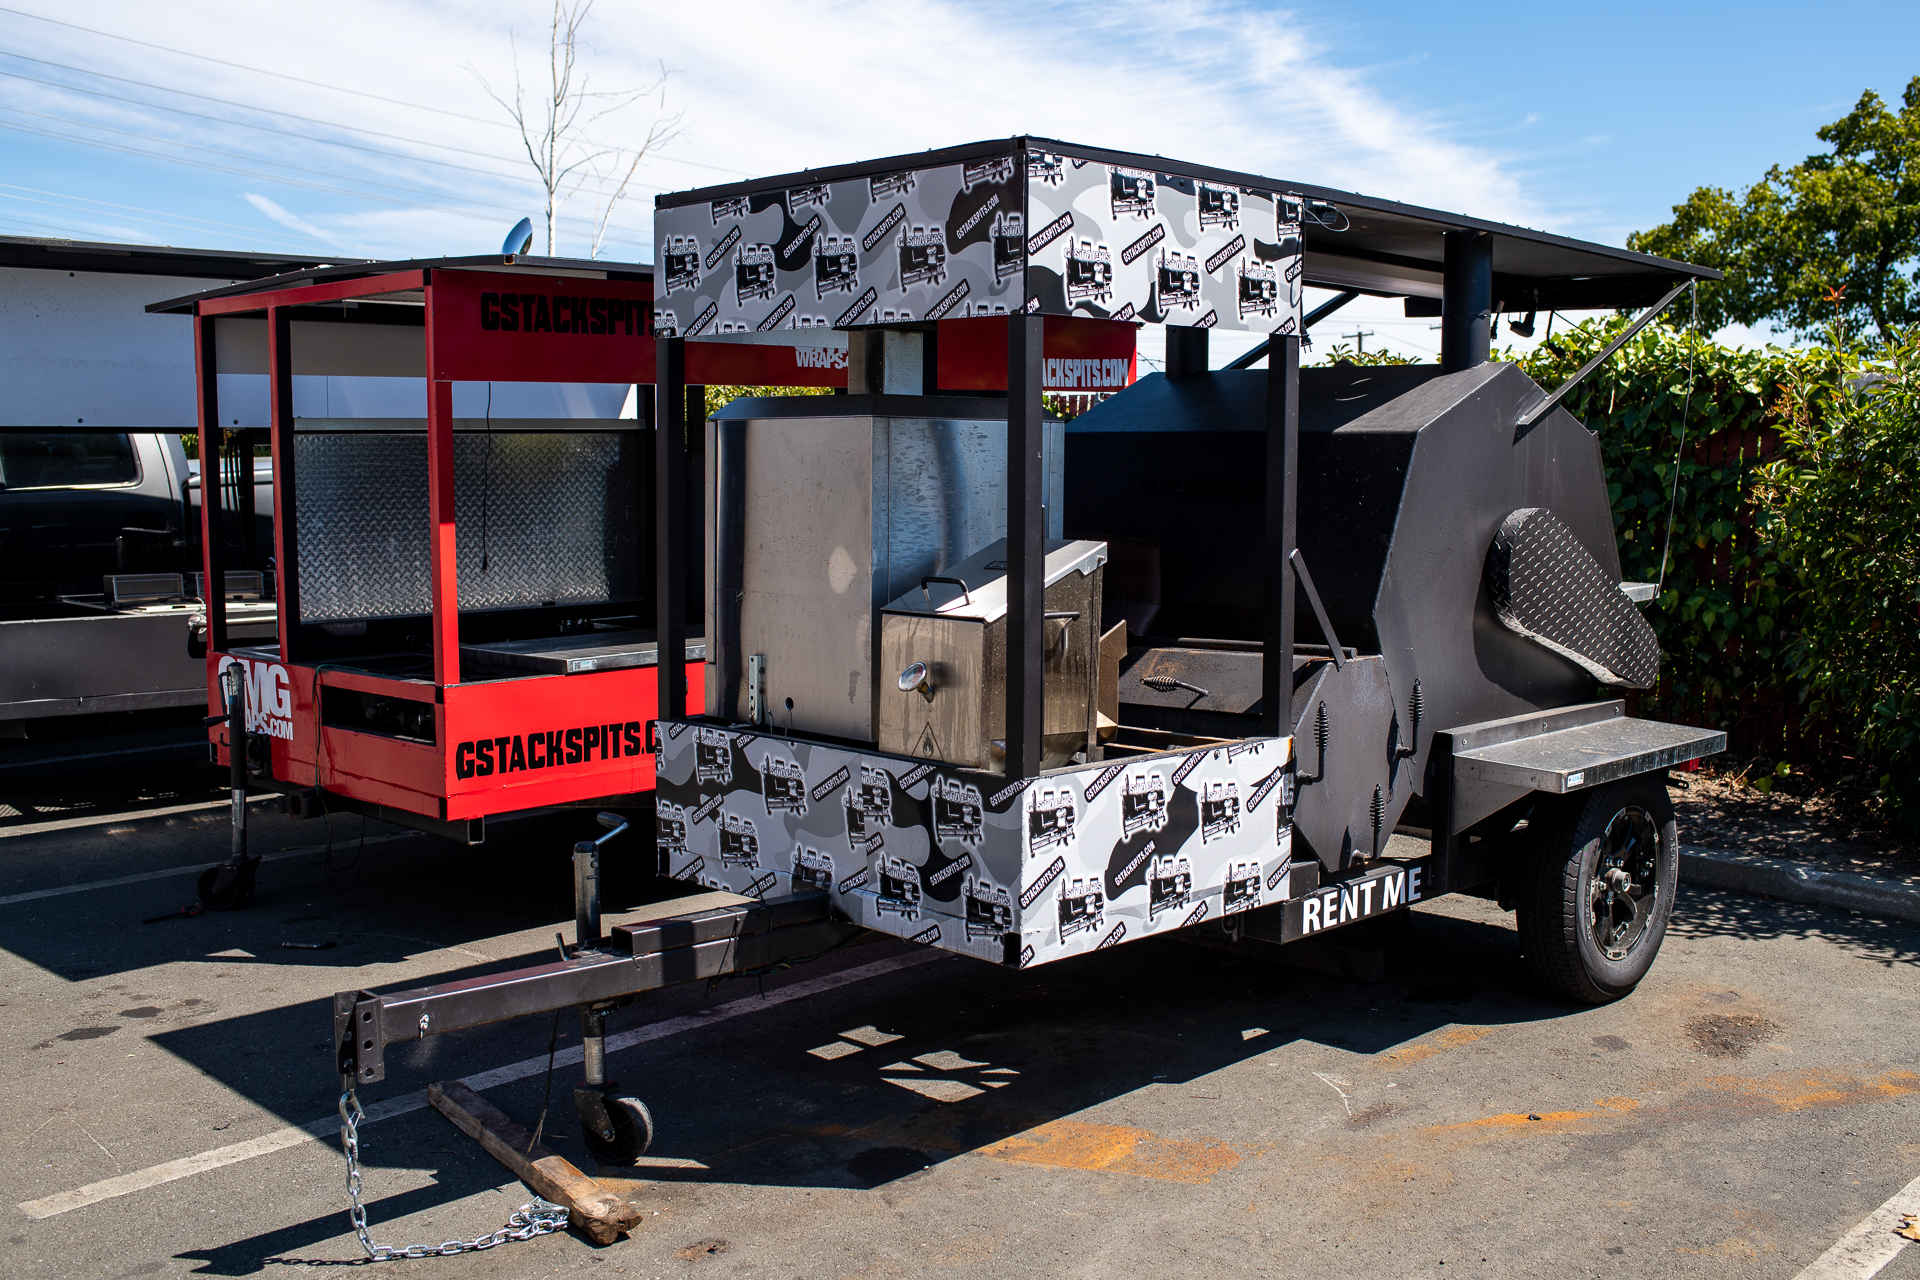 A black and white barbecue smoker on wheels in an empty lot; a red smoker is behind it.